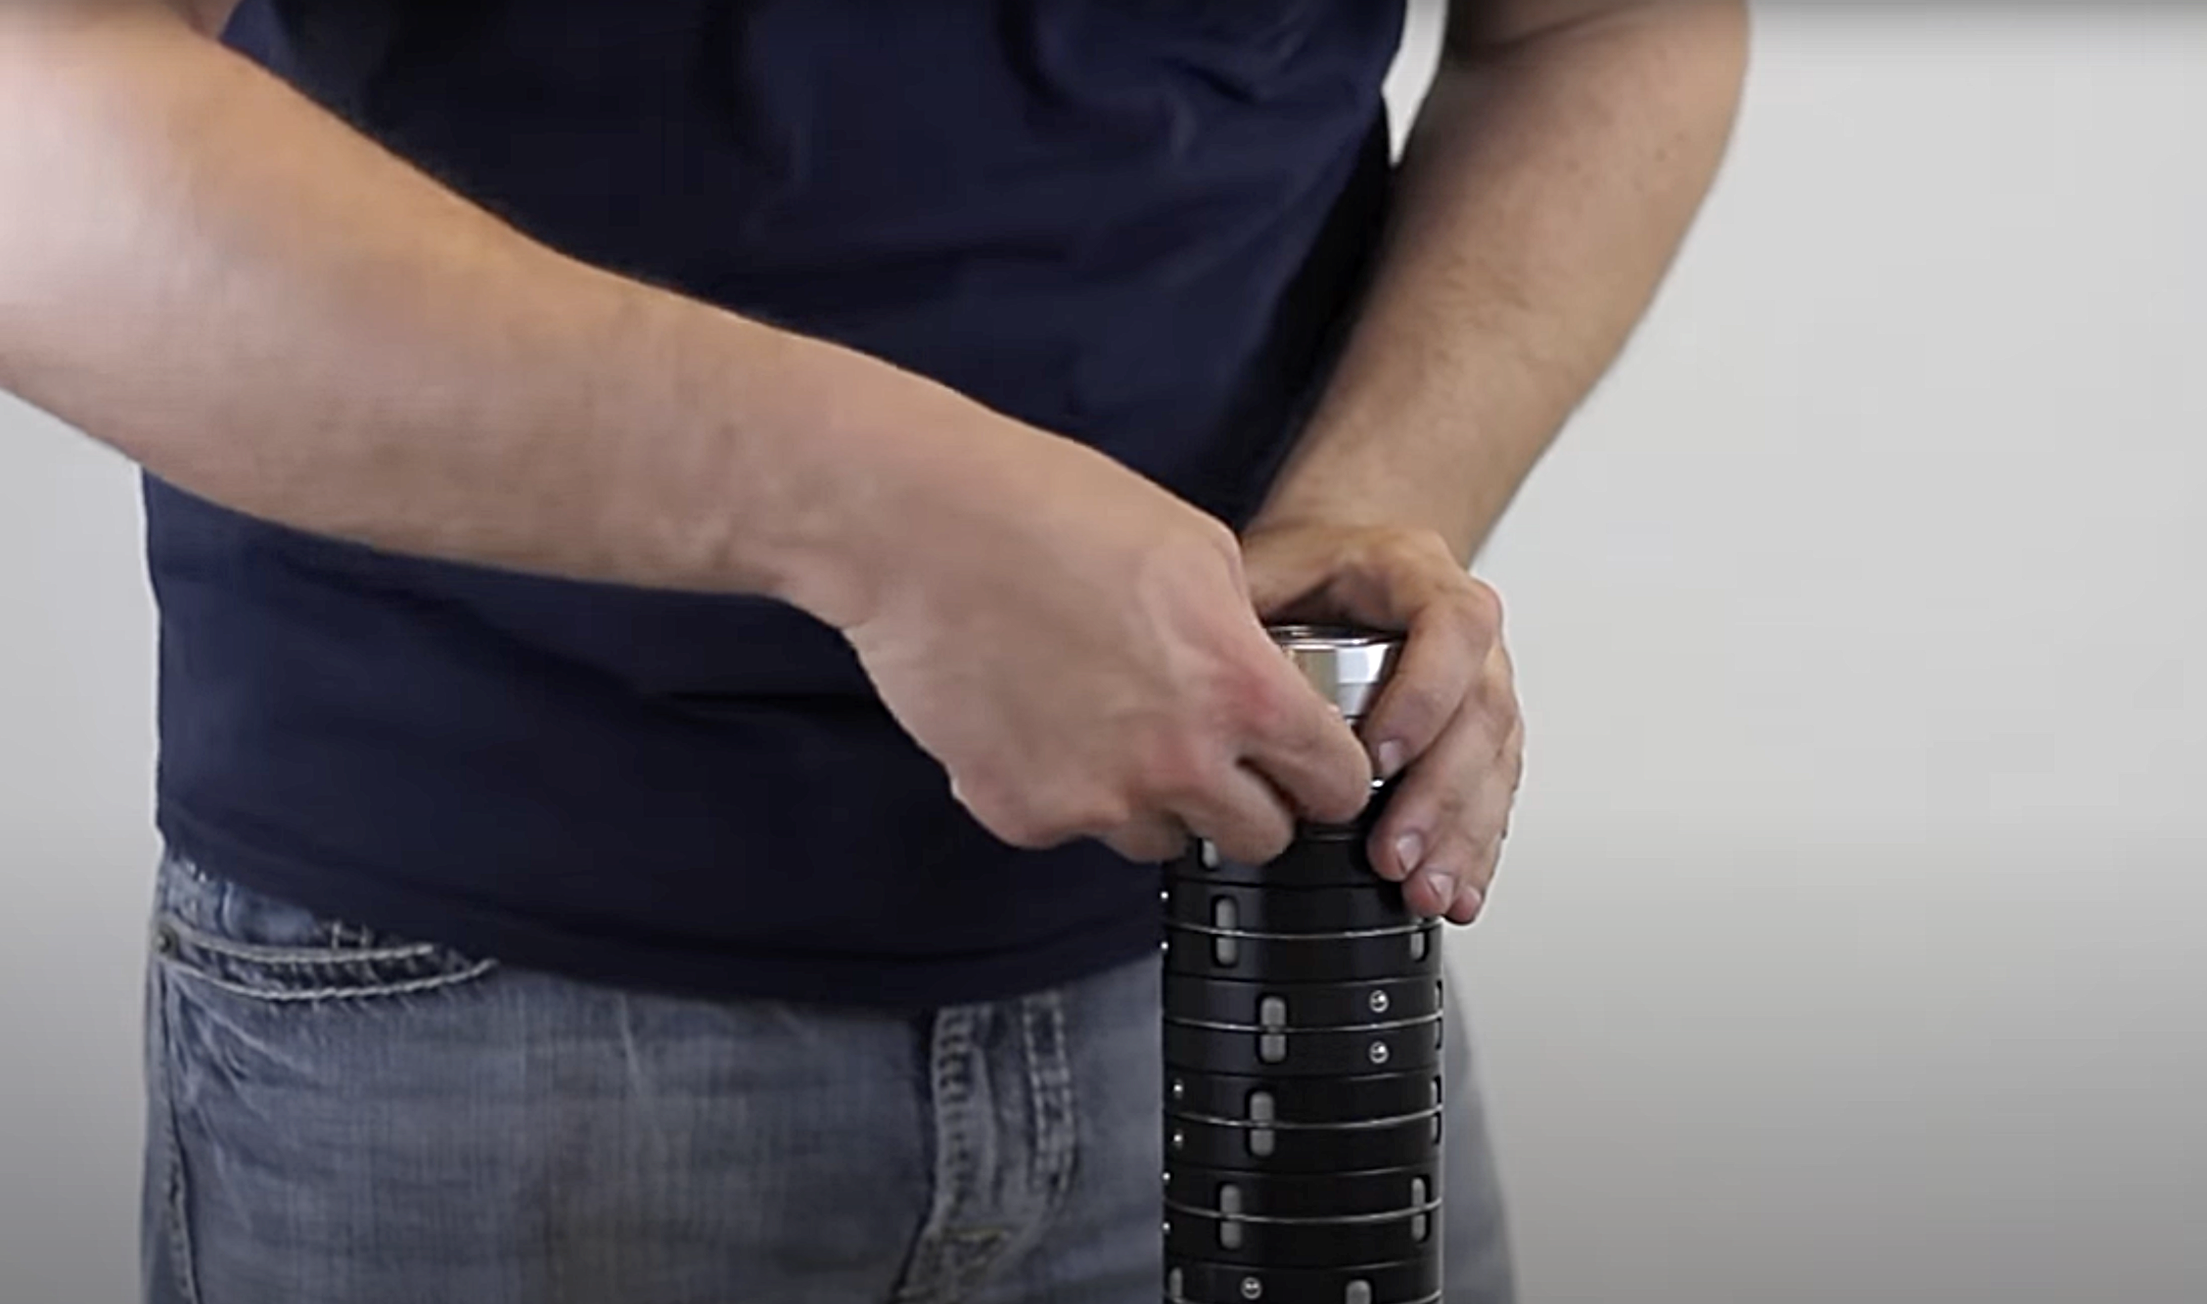 Air Roll Lock assembly tip #2 - Shaft disassembly